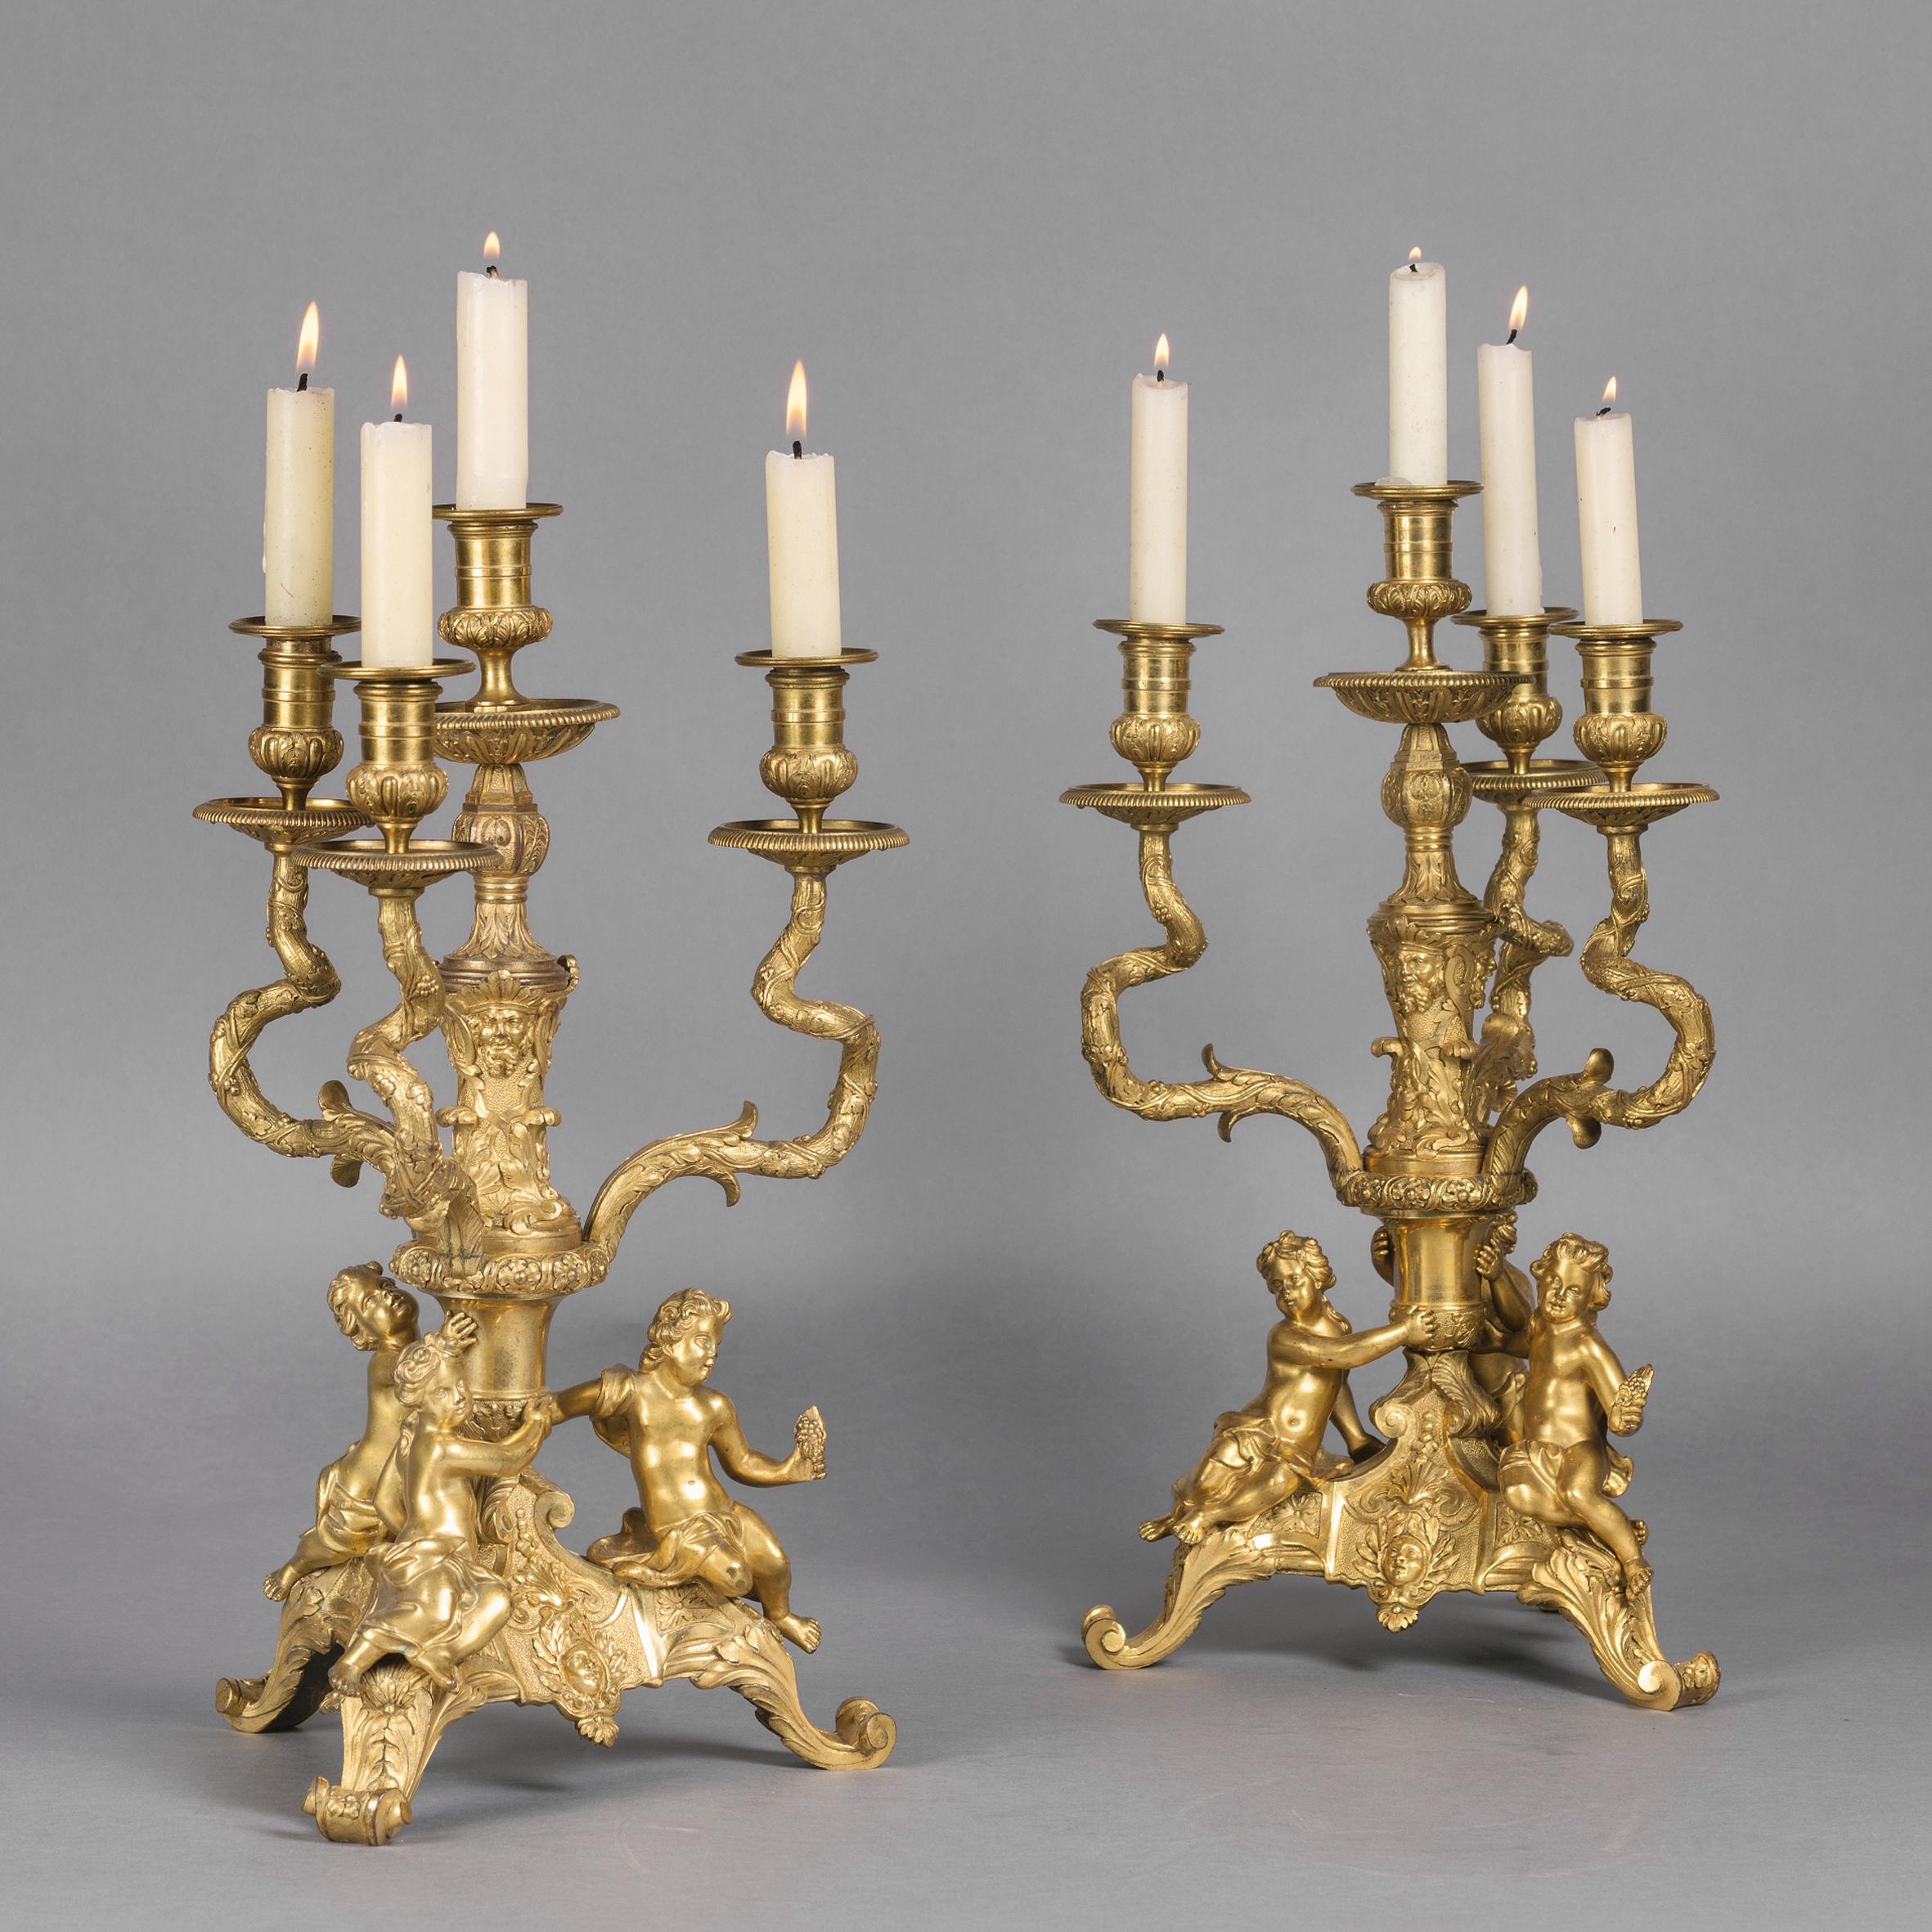 A fine pair of Regence style gilt-bronze figural four-light candelabra.

Stamped to the underside 'JB'.

Each candelabra has a tripartite base with putti figures supporting a central stem cast with grotesque masks issuing three acanthus and vine